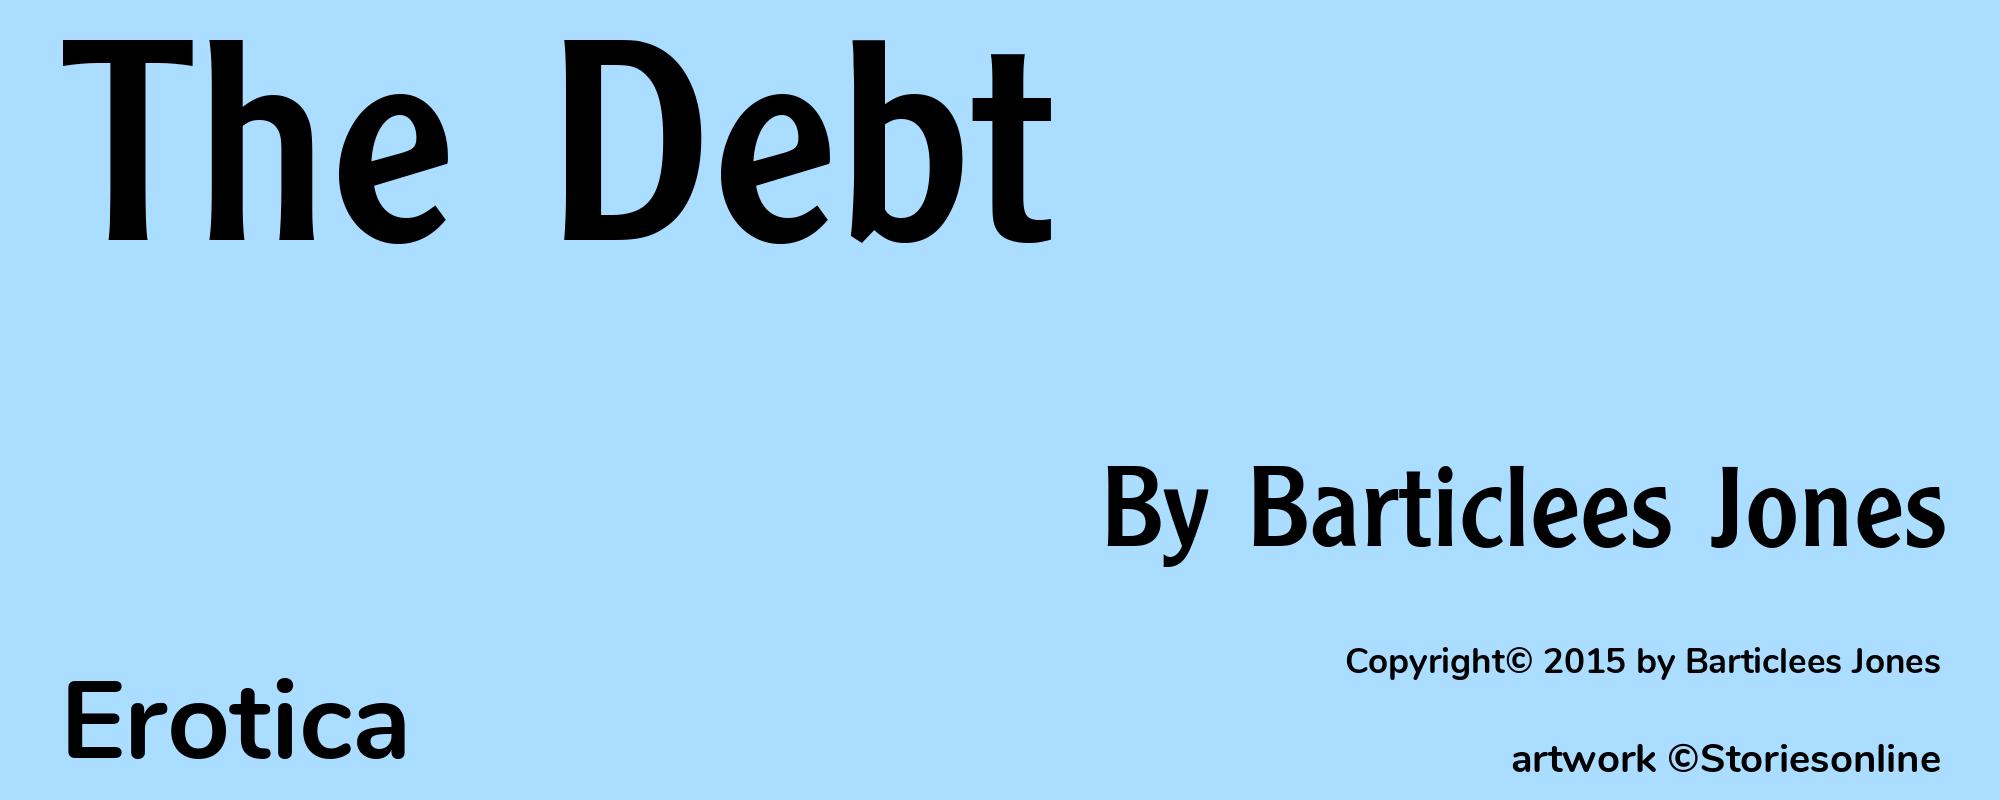 The Debt - Cover